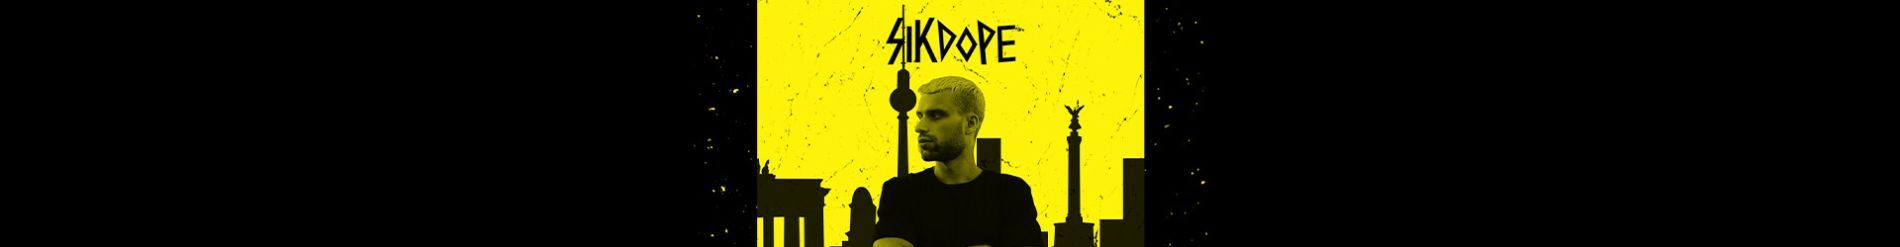 WIN AN ONLINE SESSION WITH SIKDOPE & AN UPLOAD ON HIS YOUTUBE CHANNEL!